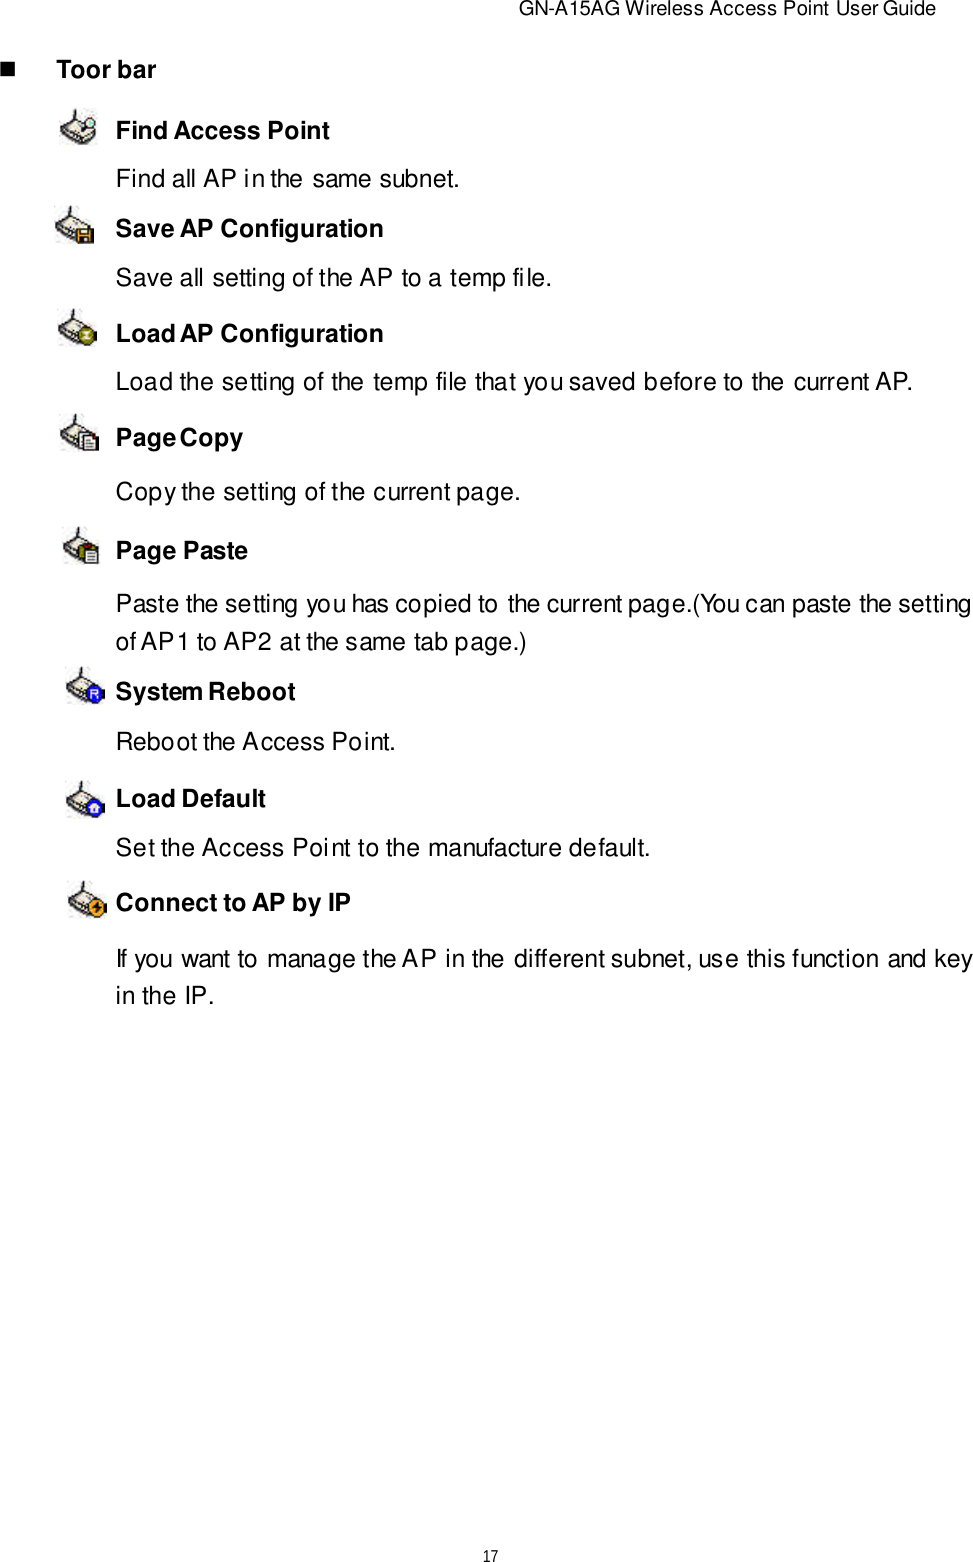                          GN-A15AG Wireless Access Point User Guide17nToor barFind Access PointSave AP ConfigurationPage CopySystem RebootConnect to AP by IPLoad AP ConfigurationPage PasteLoad DefaultFind all AP in the same subnet.Save all setting of the AP to a temp file.Load the setting of the temp file that you saved before to the current AP.Copy the setting of the current page.Paste the setting you has copied to the current page.(You can paste the settingof AP1 to AP2 at the same tab page.)Reboot the Access Point.Set the Access Point to the manufacture default.If you want to manage the AP in the different subnet, use this function and keyin the IP.